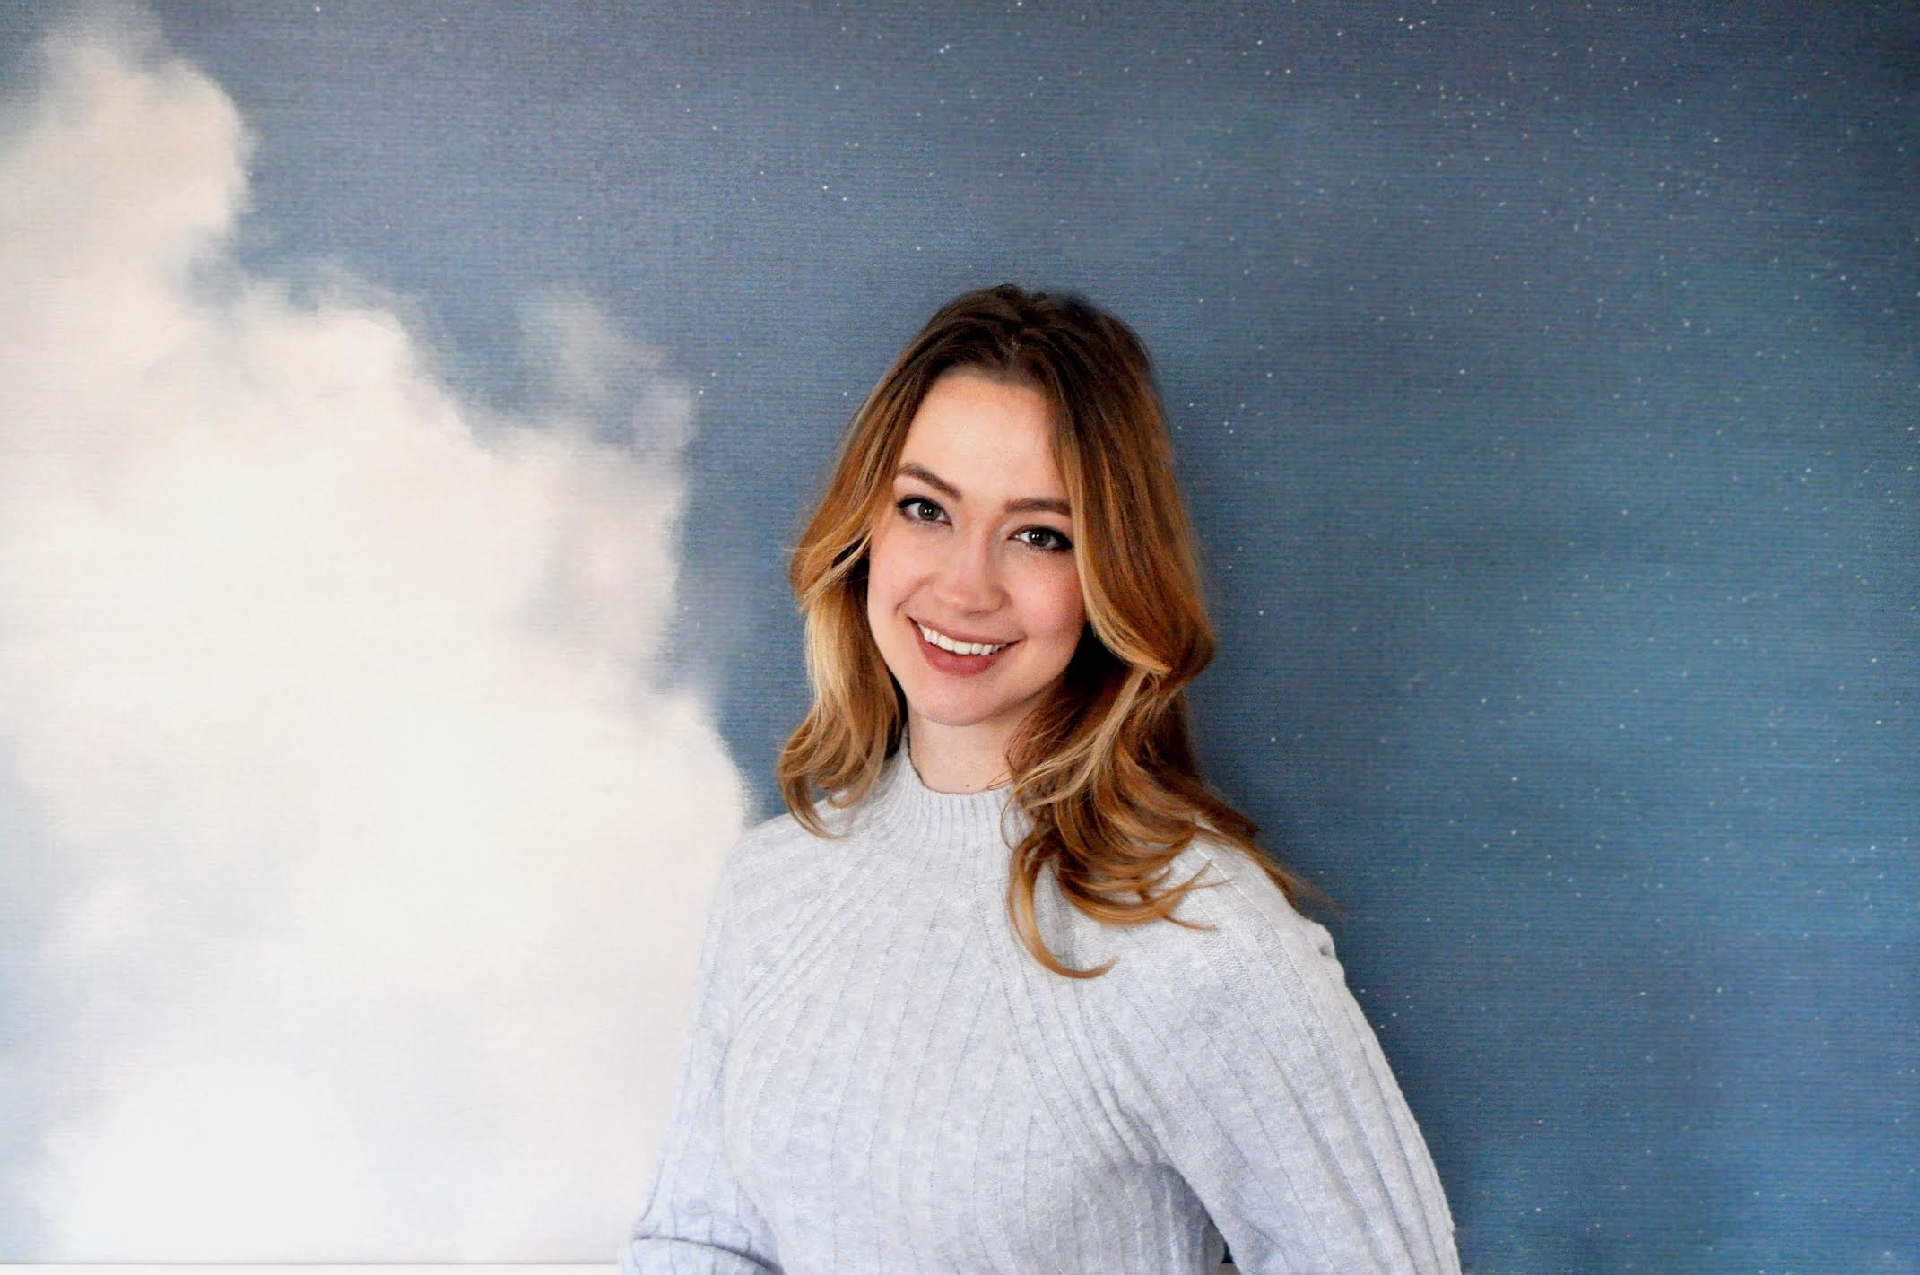 Photo of Kaitlyn Knopp against a blue background with a cloud